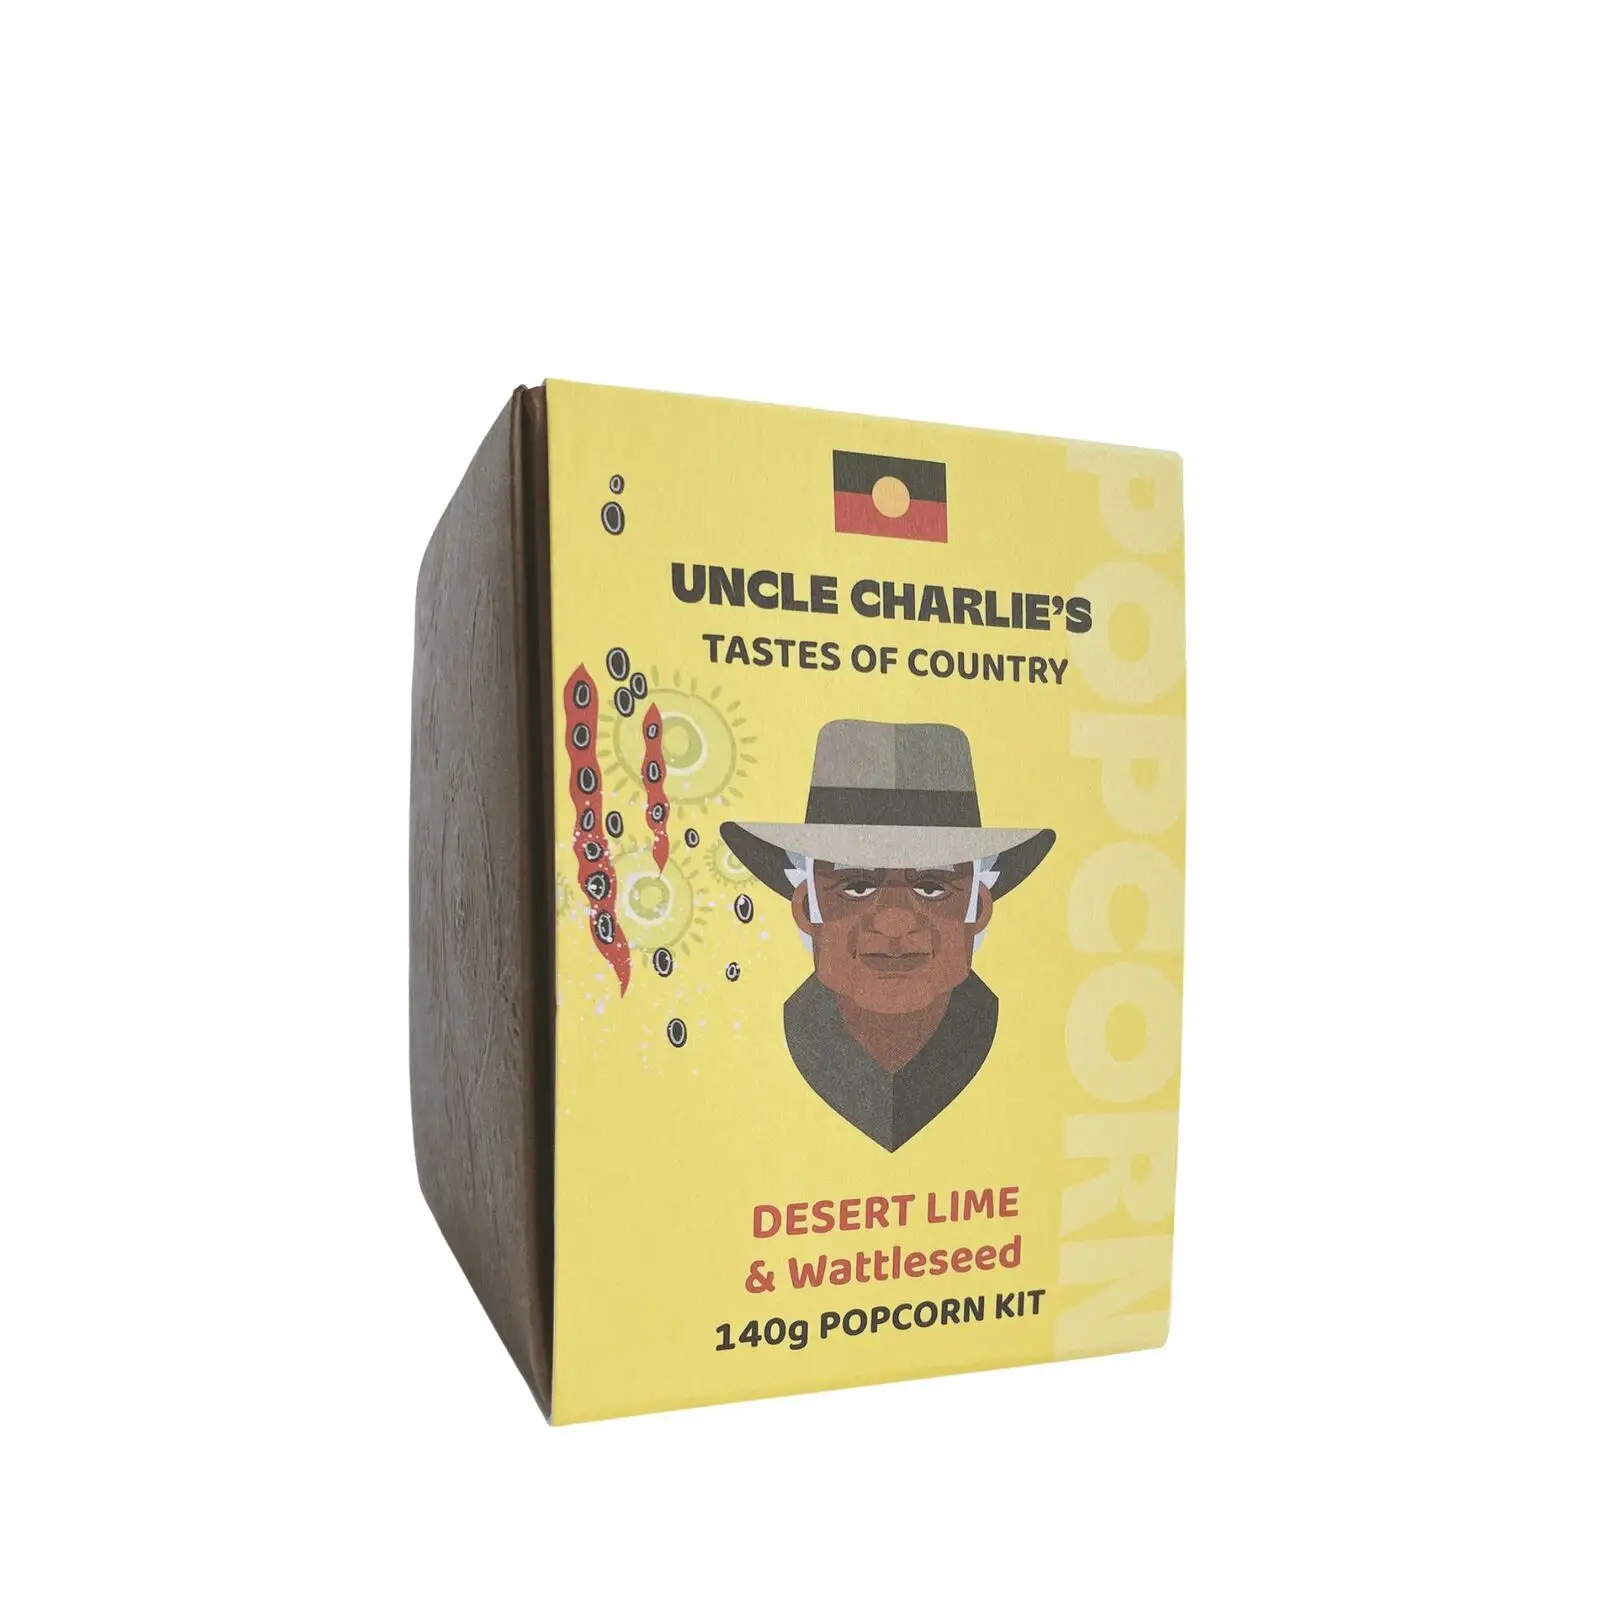 Uncle Charlie's Tastes of Country Popcorn Kit Small Desert Lime & Wattle Seed  (140g)